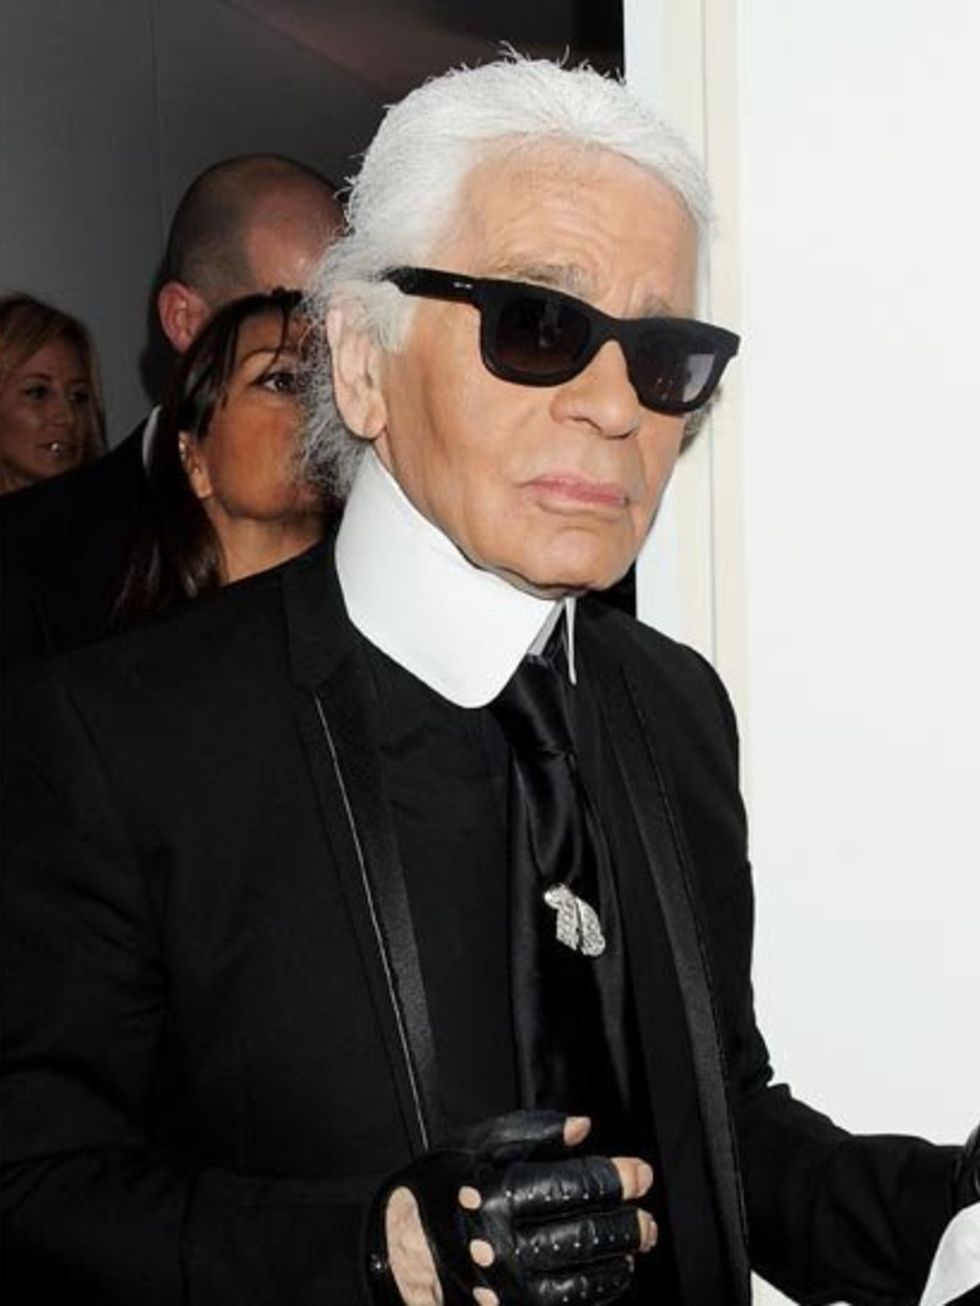 <p>Karl Lagerfeld at the Selfridges launch event</p>